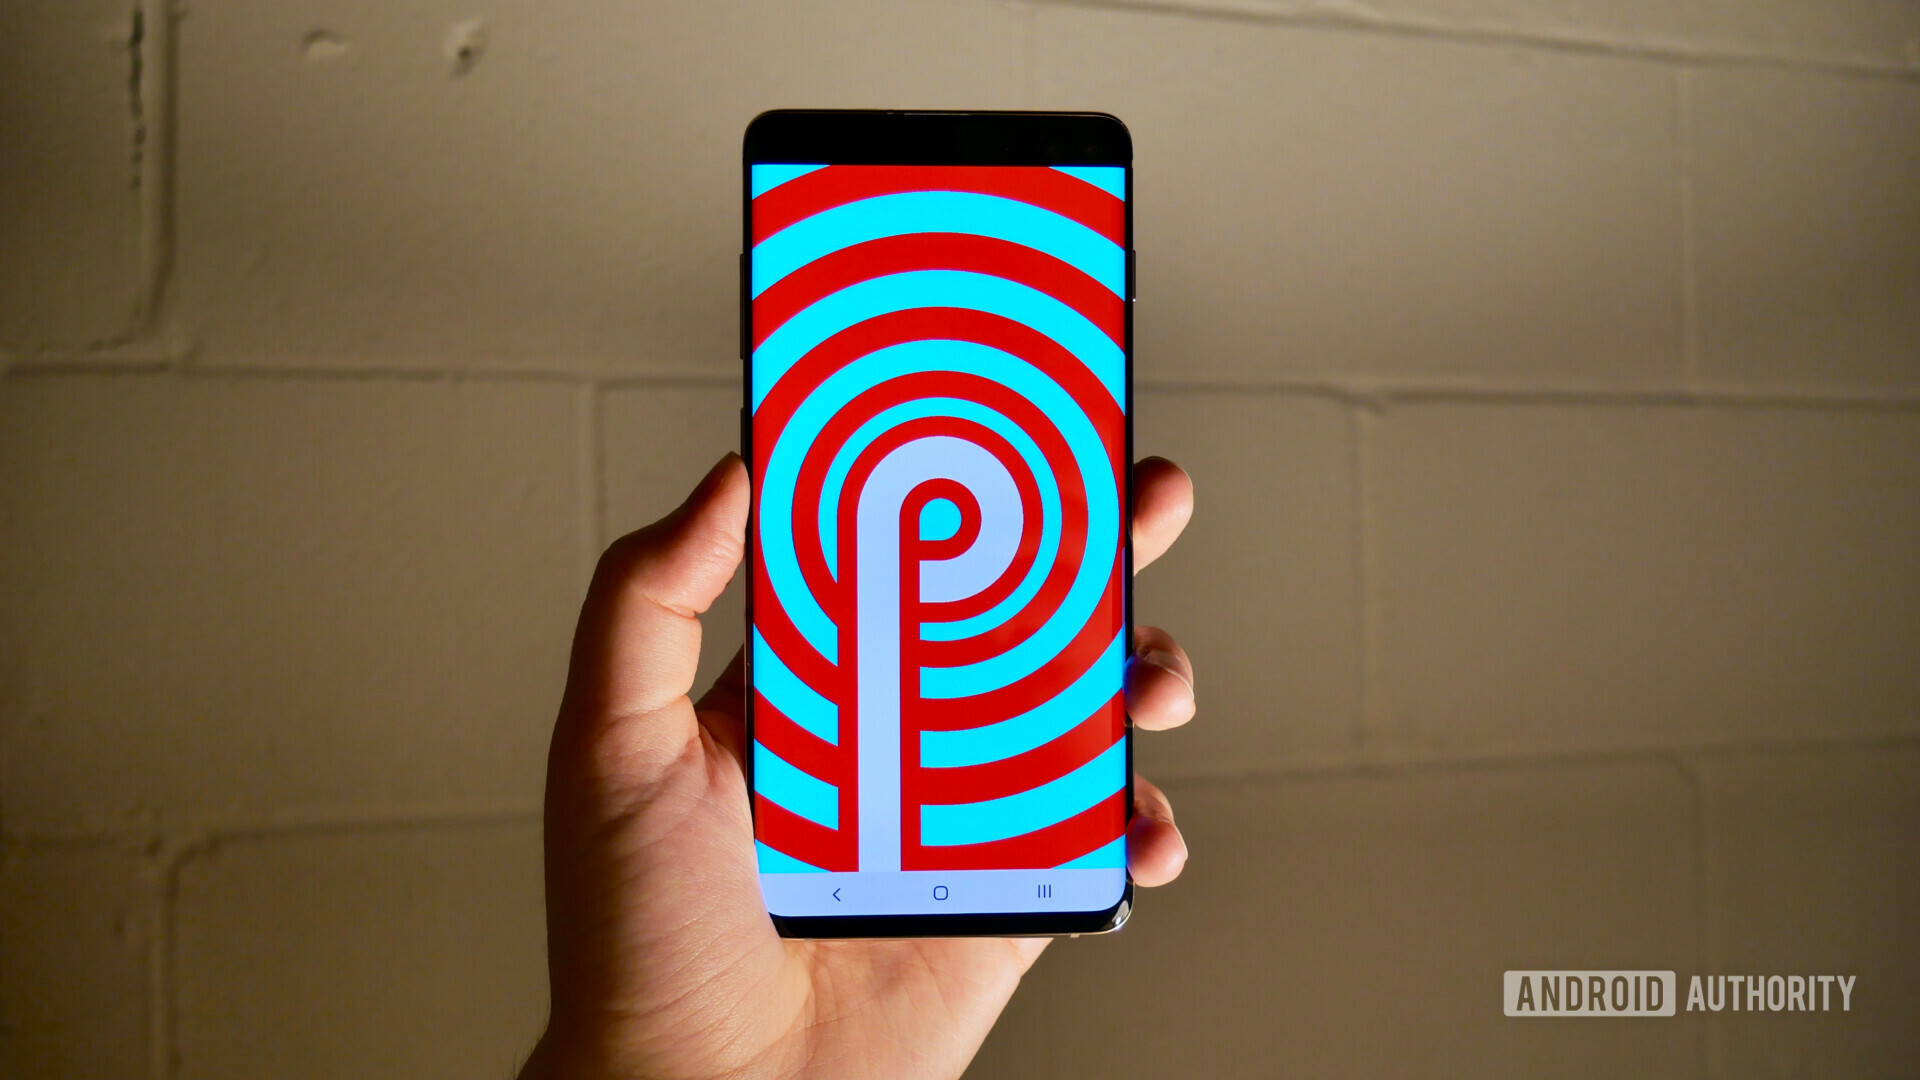 Samsung Galaxy S10 Android Pie